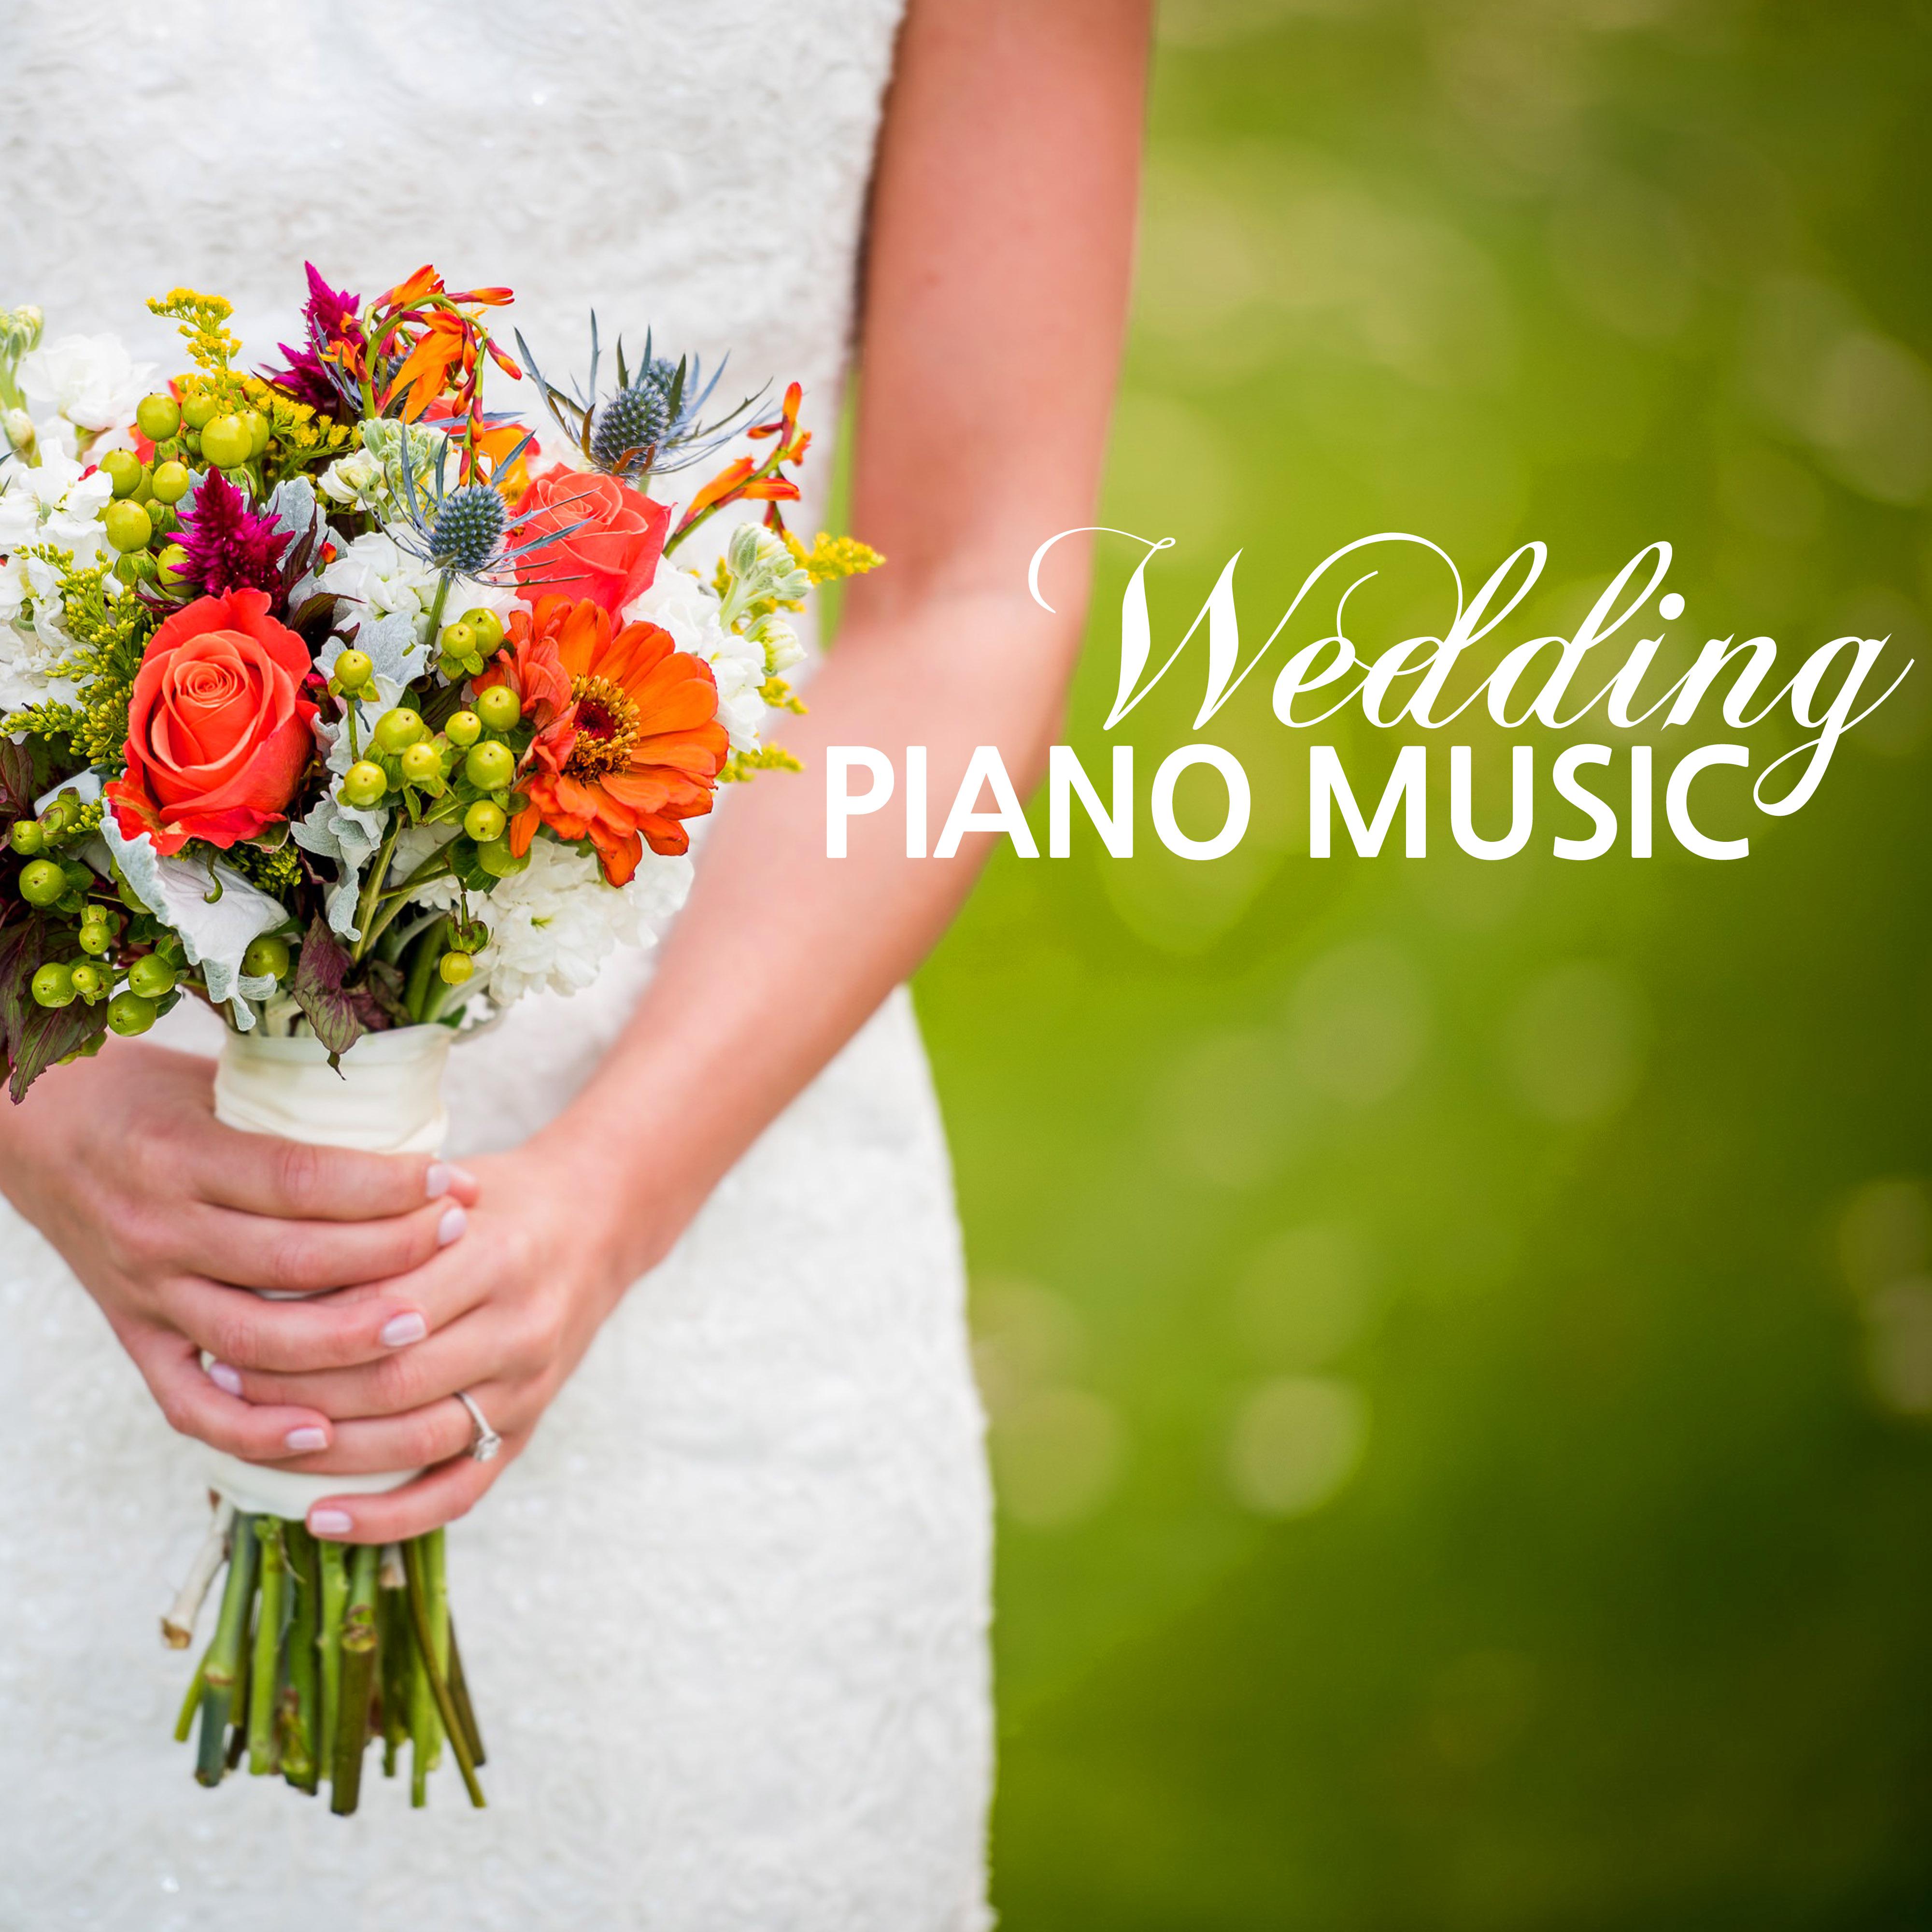 Wedding Piano Music - Relaxing Instrumental Songs for Cerimony, Dinner Party & Reception Waiting Room Background